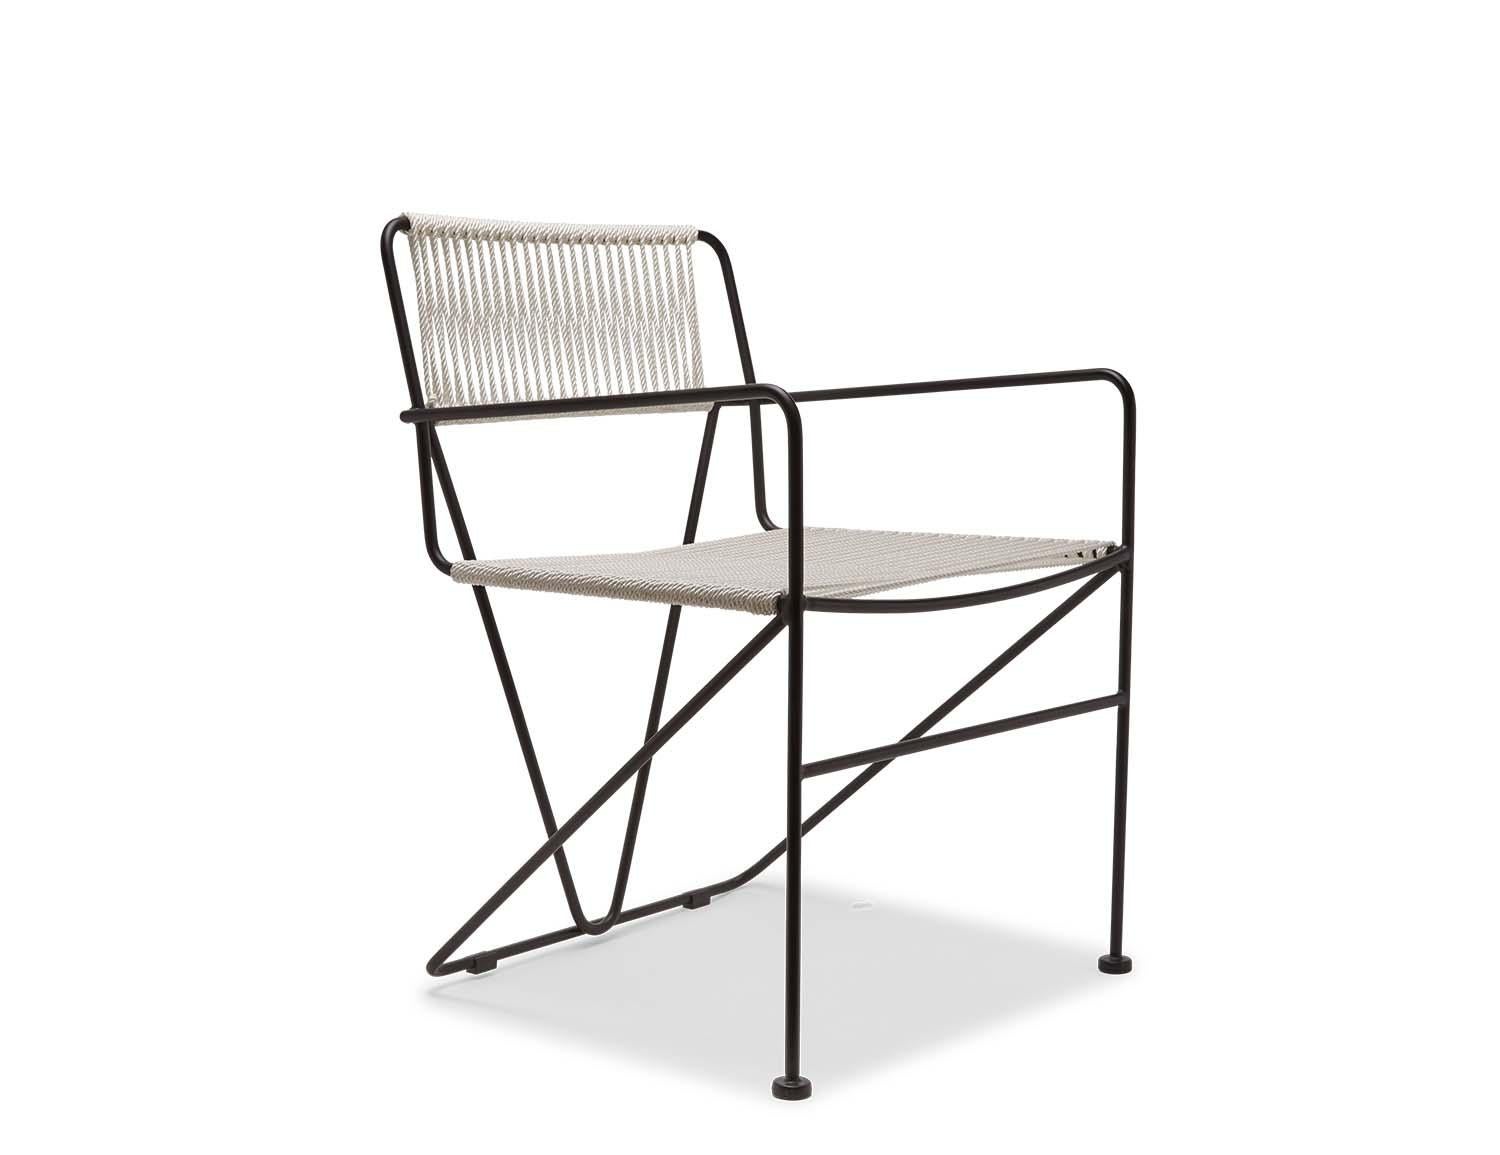 The Corded Hinterland Dining Chair features a powder coated steel frame with a woven rope seat and back. For indoor or outdoor use. Previously named the Corded Montrose Dining Chair.

The Lawson-Fenning Collection is designed and handmade in Los